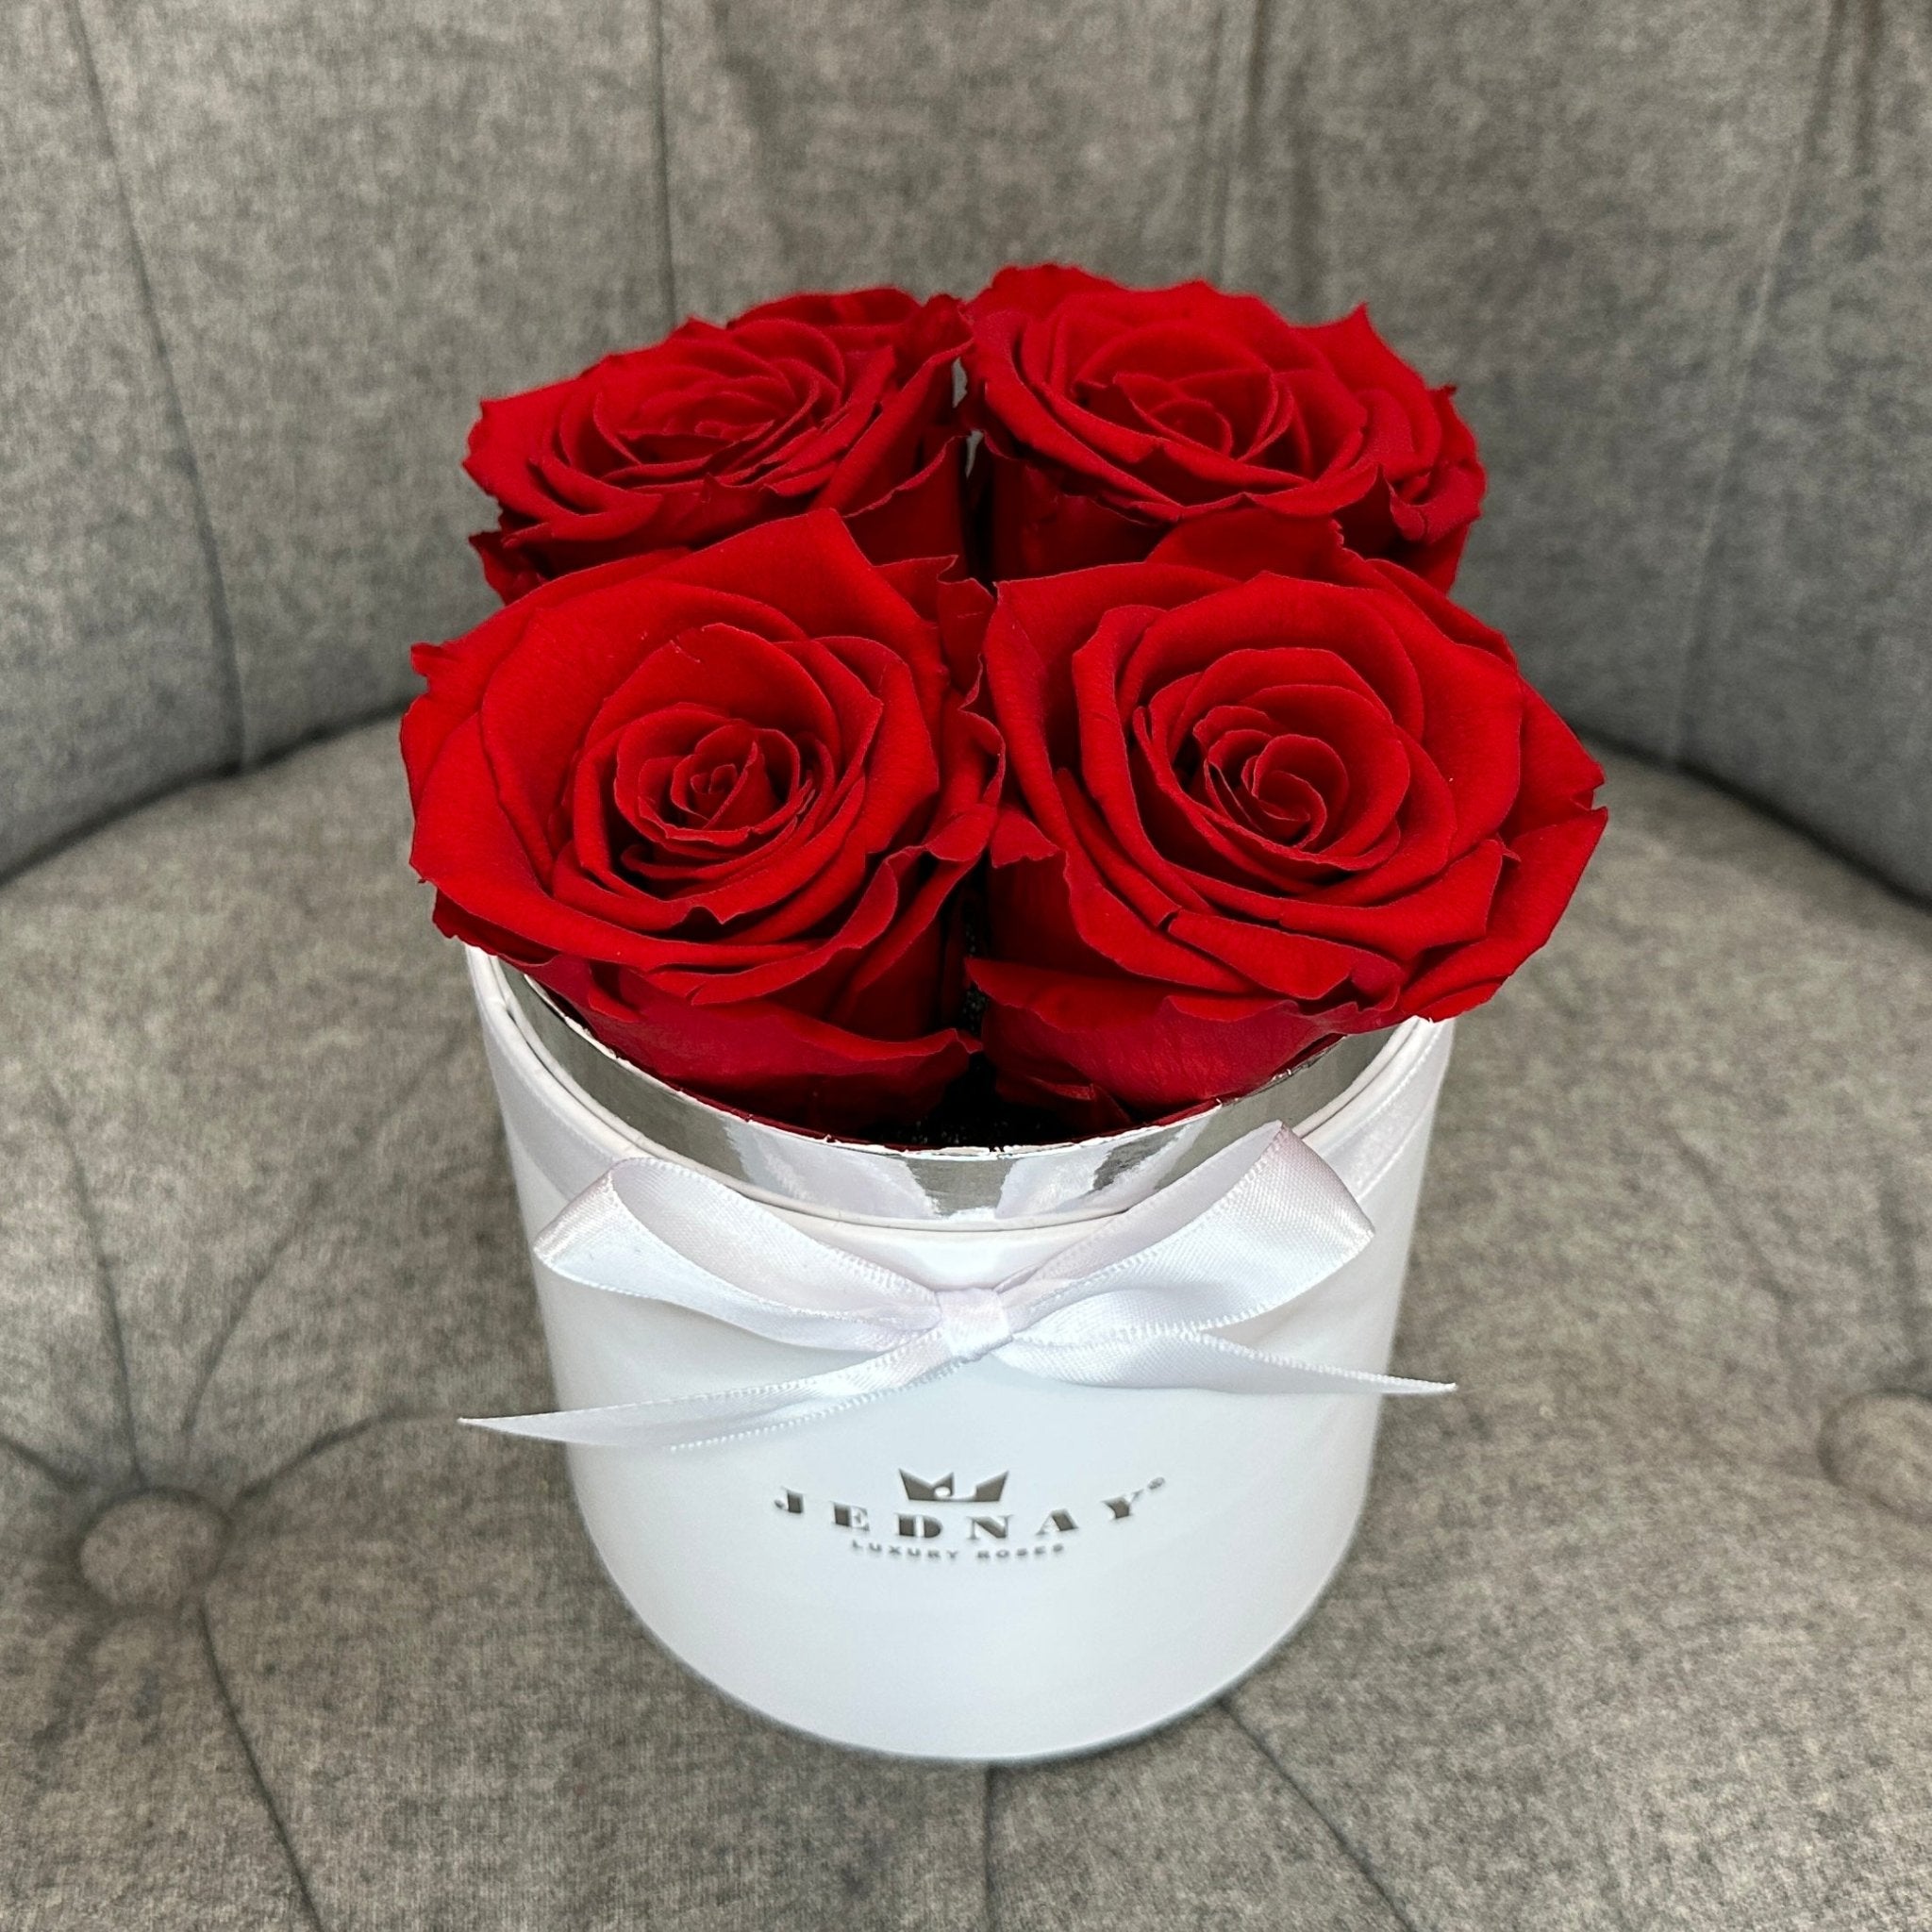 Petite Classic White Forever Rose Box - Classic Red Eternal Roses - Jednay Roses